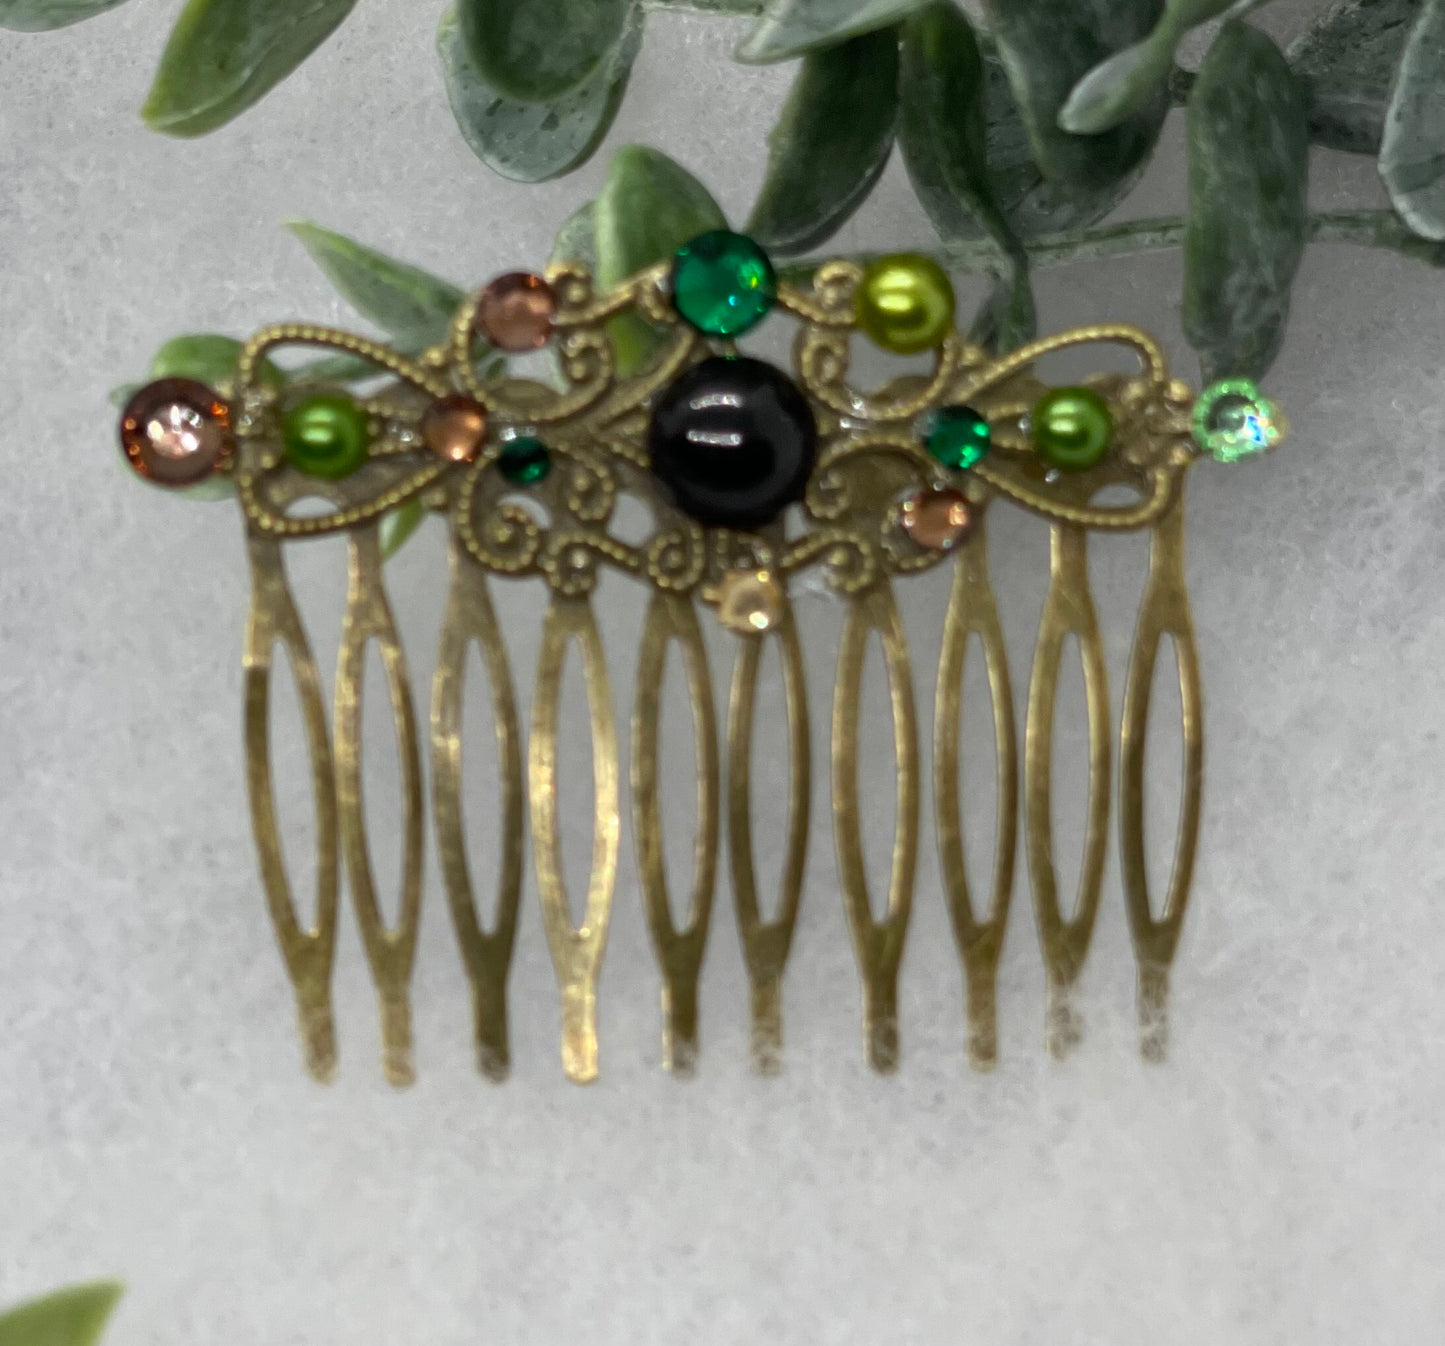 Camouflage crystal rhinestone pearl vintage style antique  hair accessories gift birthday event formal bridesmaid  2.5” Metal side Comb #899